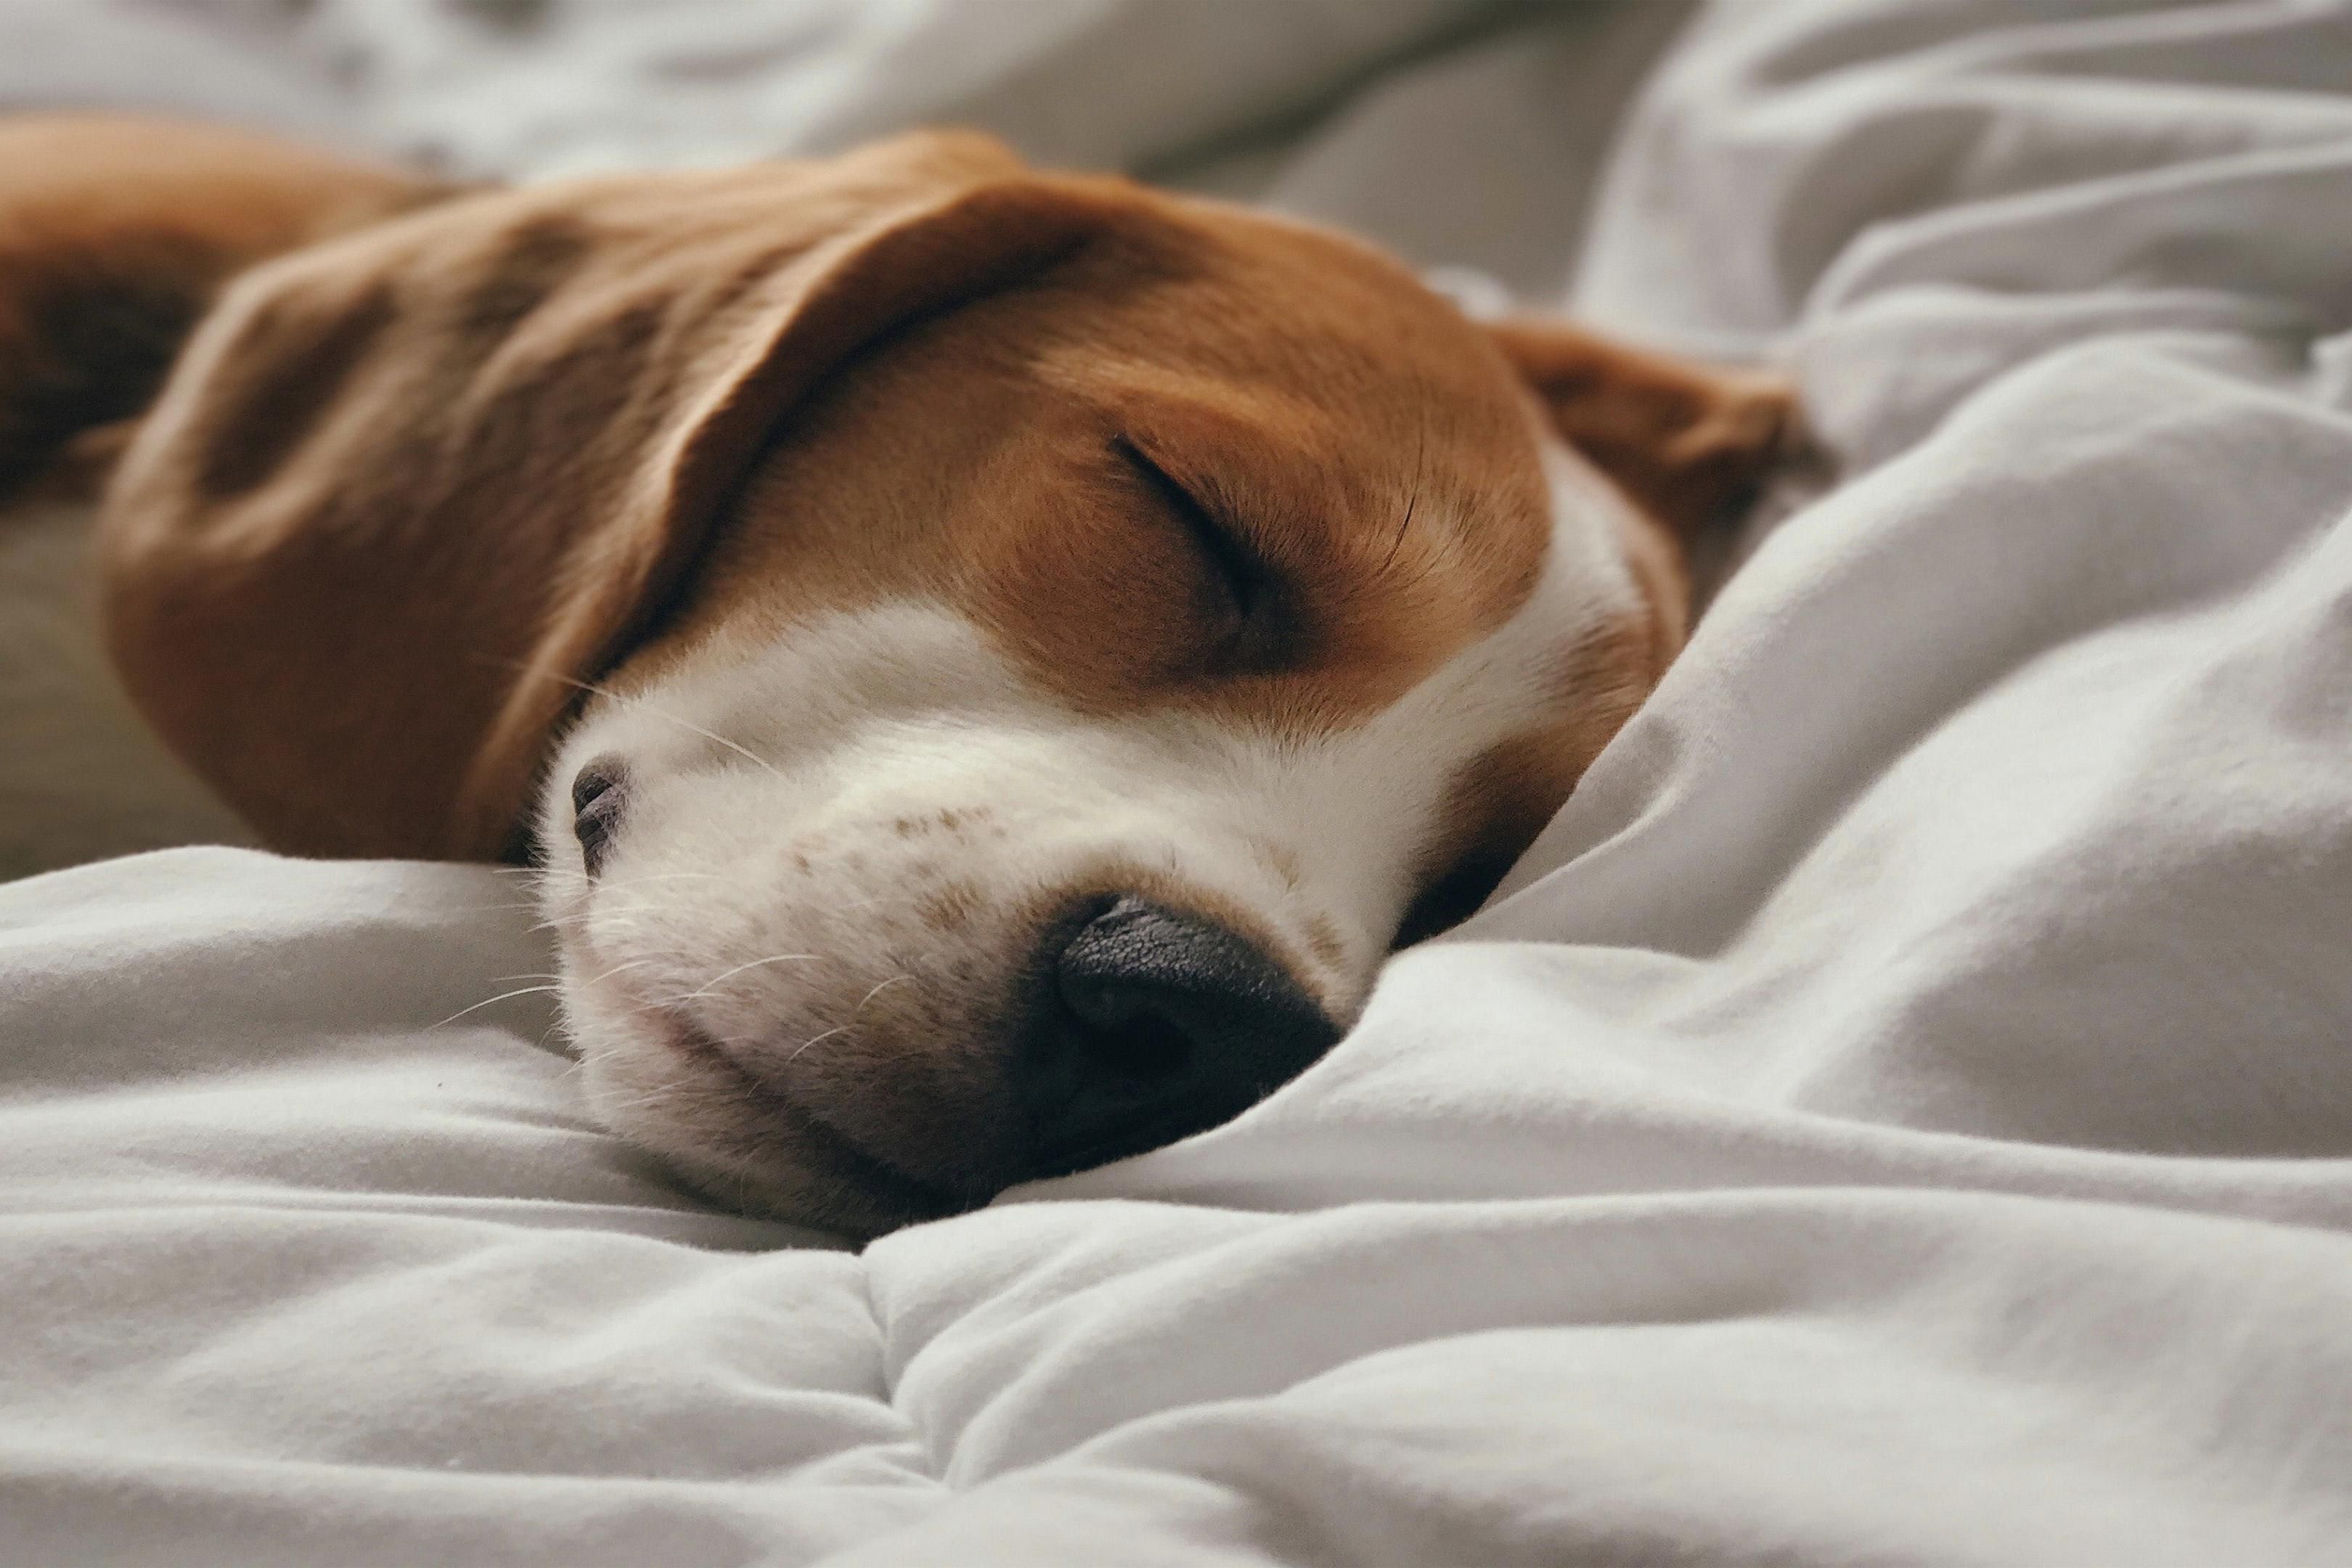 No need to leave your furry friends at home. Our Staybridge Suites is pet friendly. Pet fee of $75 for stays under 6 nights. $150 for stays over 7 nights. Pet walking area with doggie doodie bags and trash receptacle.